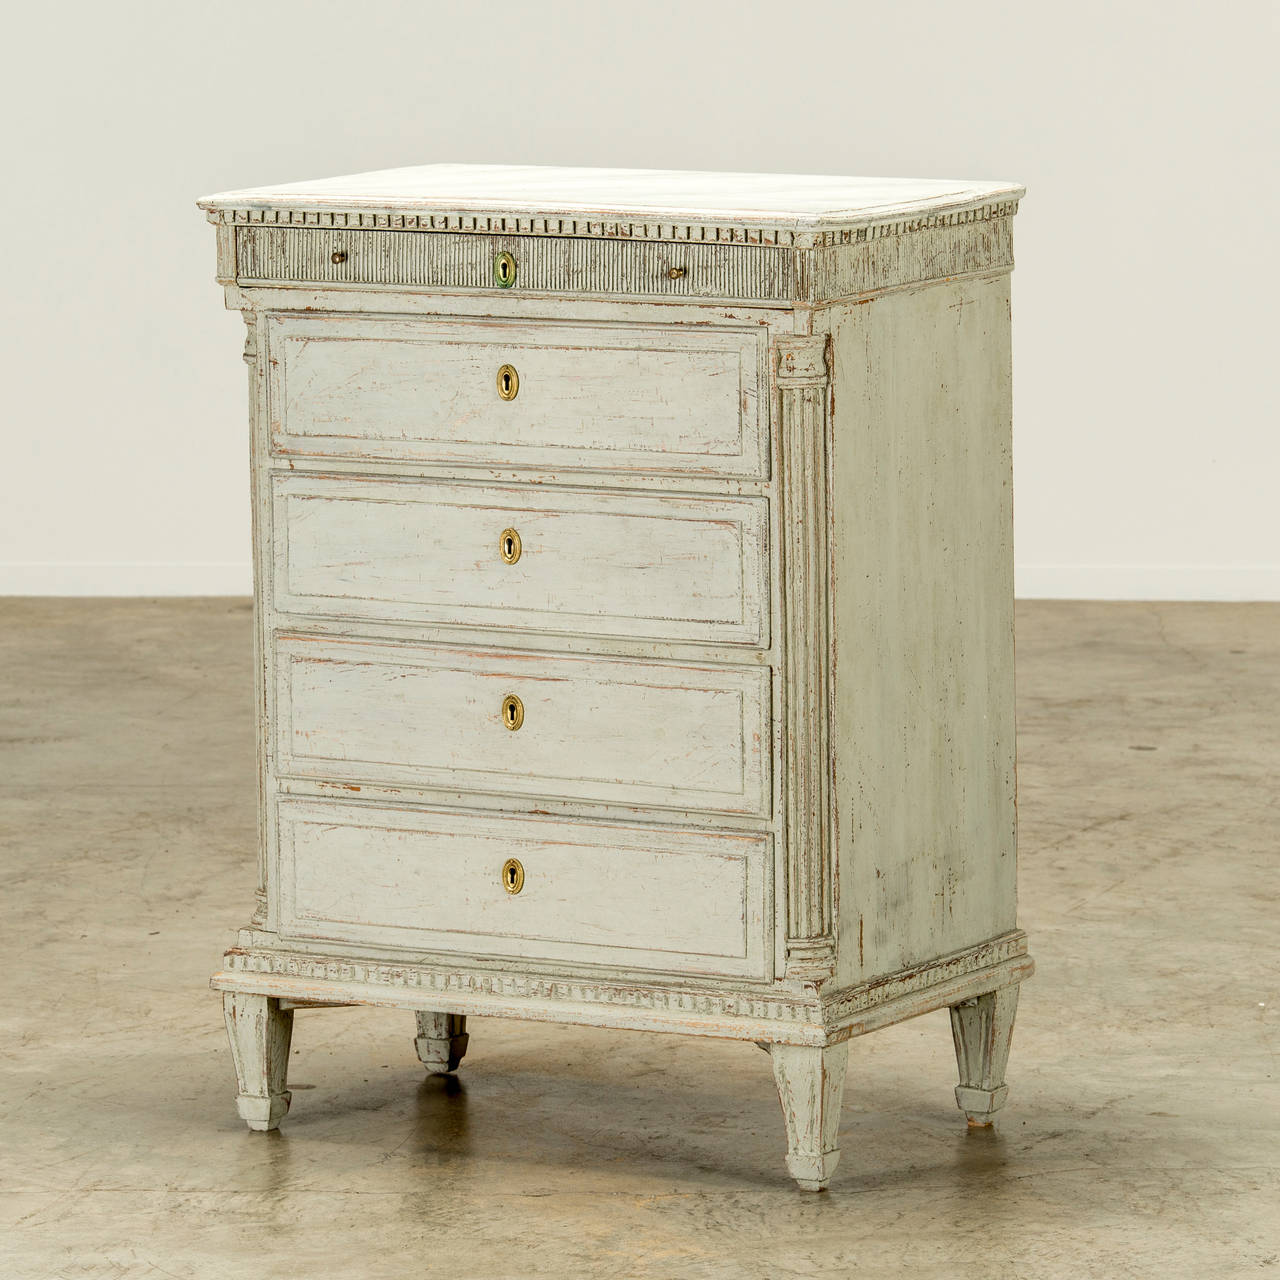 Louis XVI chest of drawers in grey/white. Top drawer and quarter pillar with grooves. Fine patina. Denmark, 1780-90.